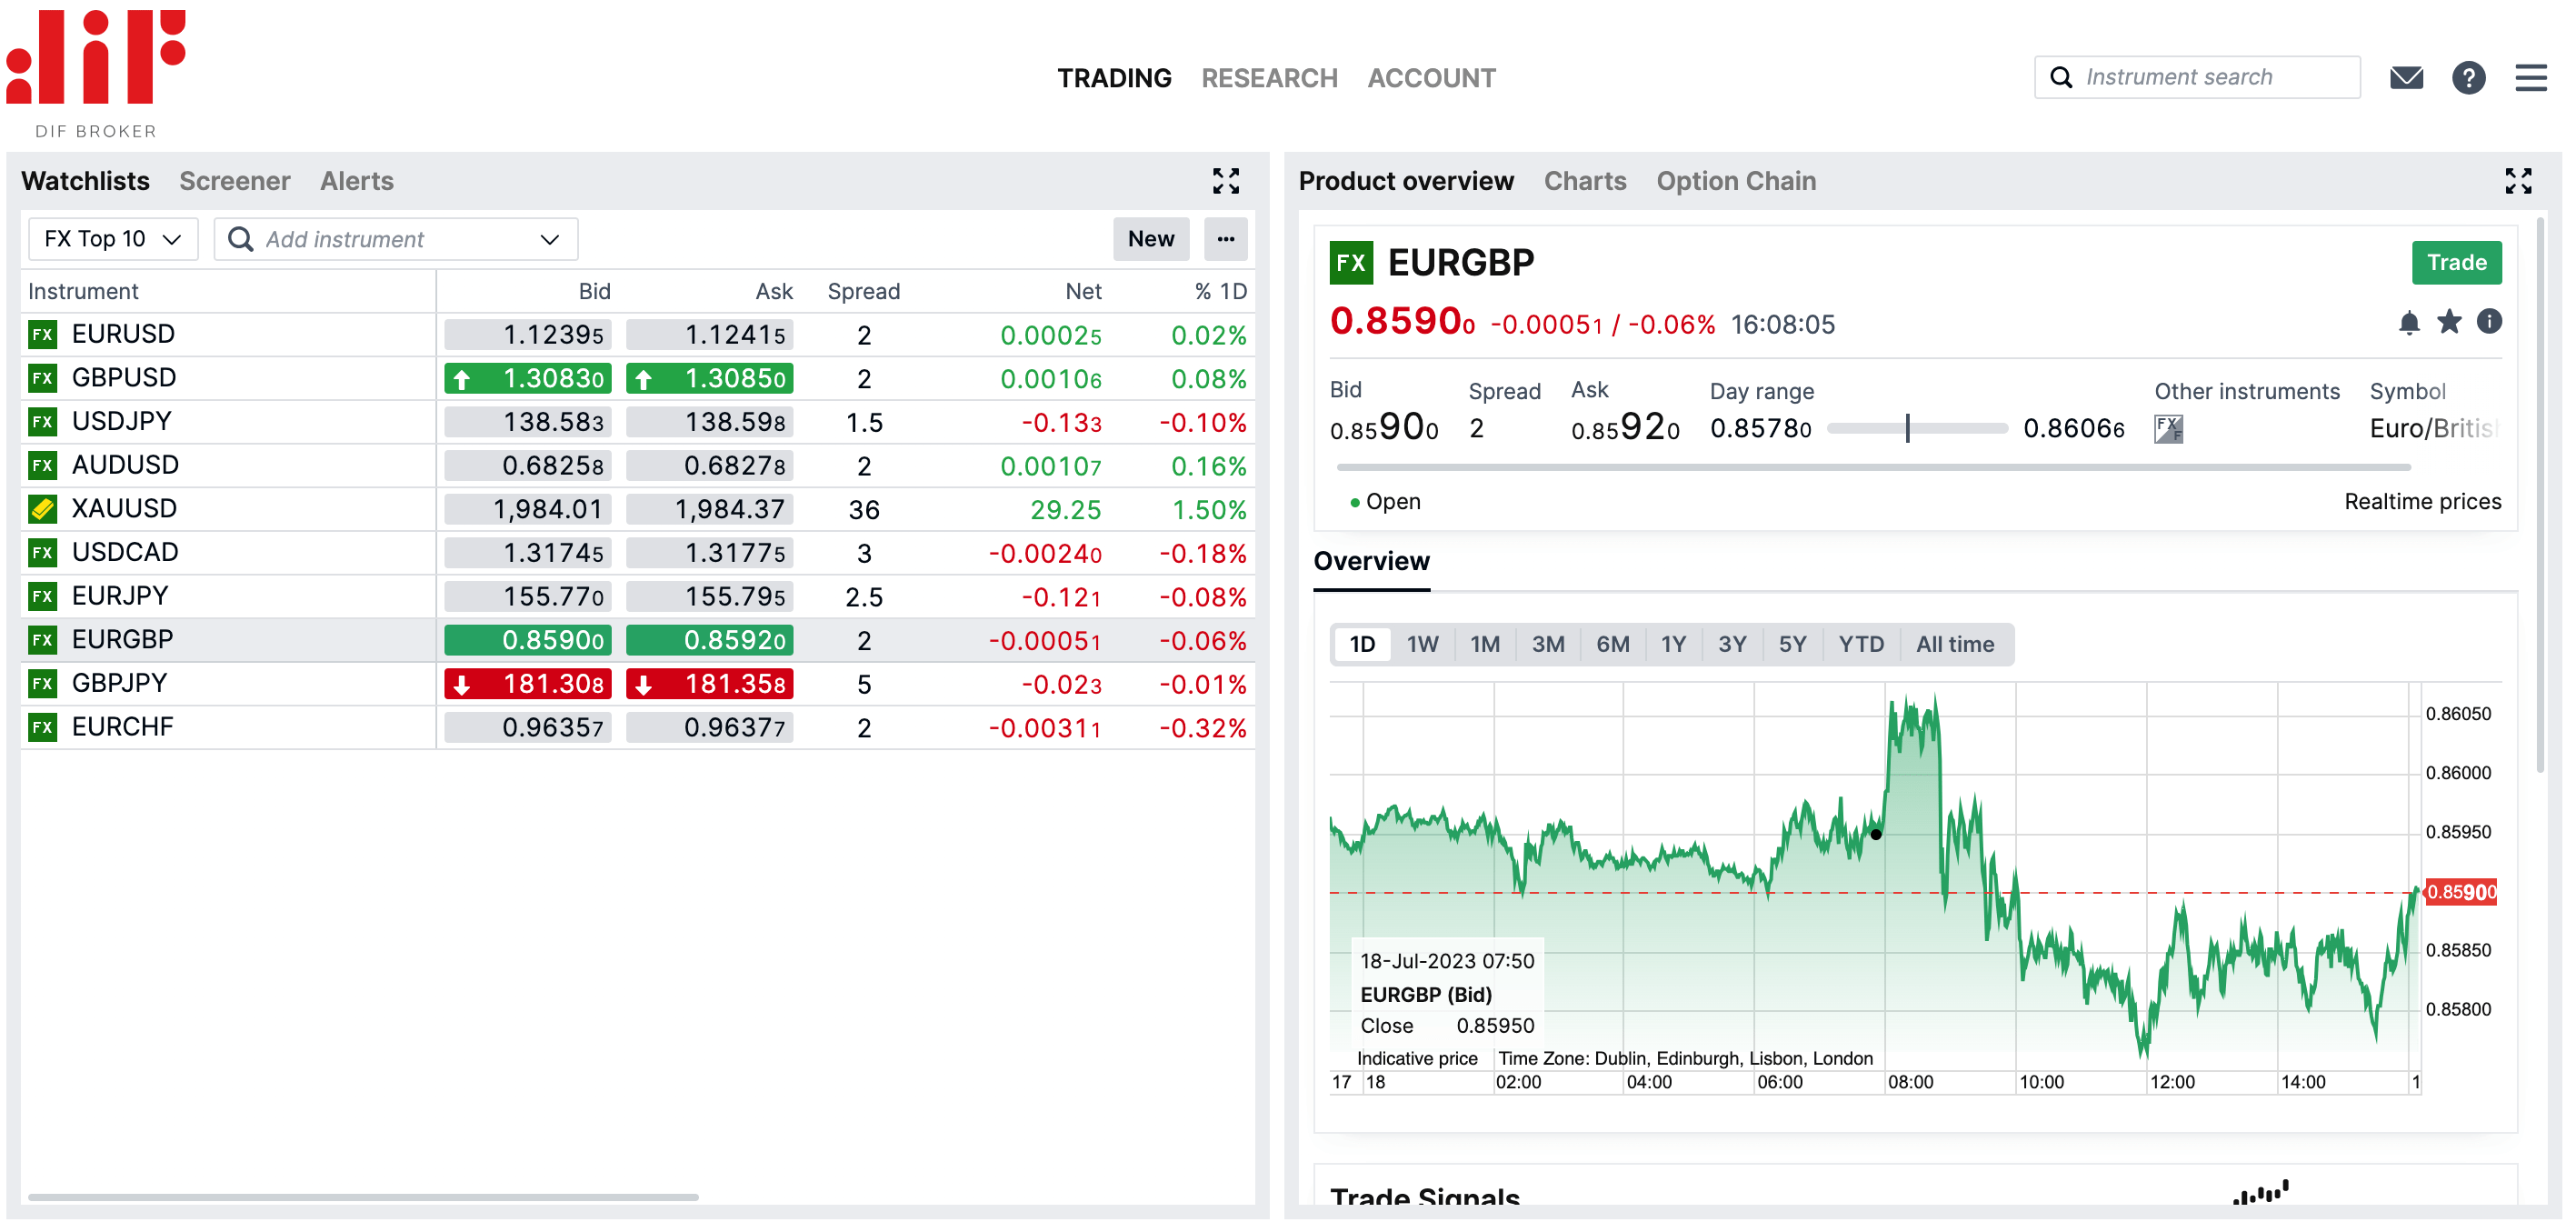 DIF Broker's proprietary trading platform interface and charting window